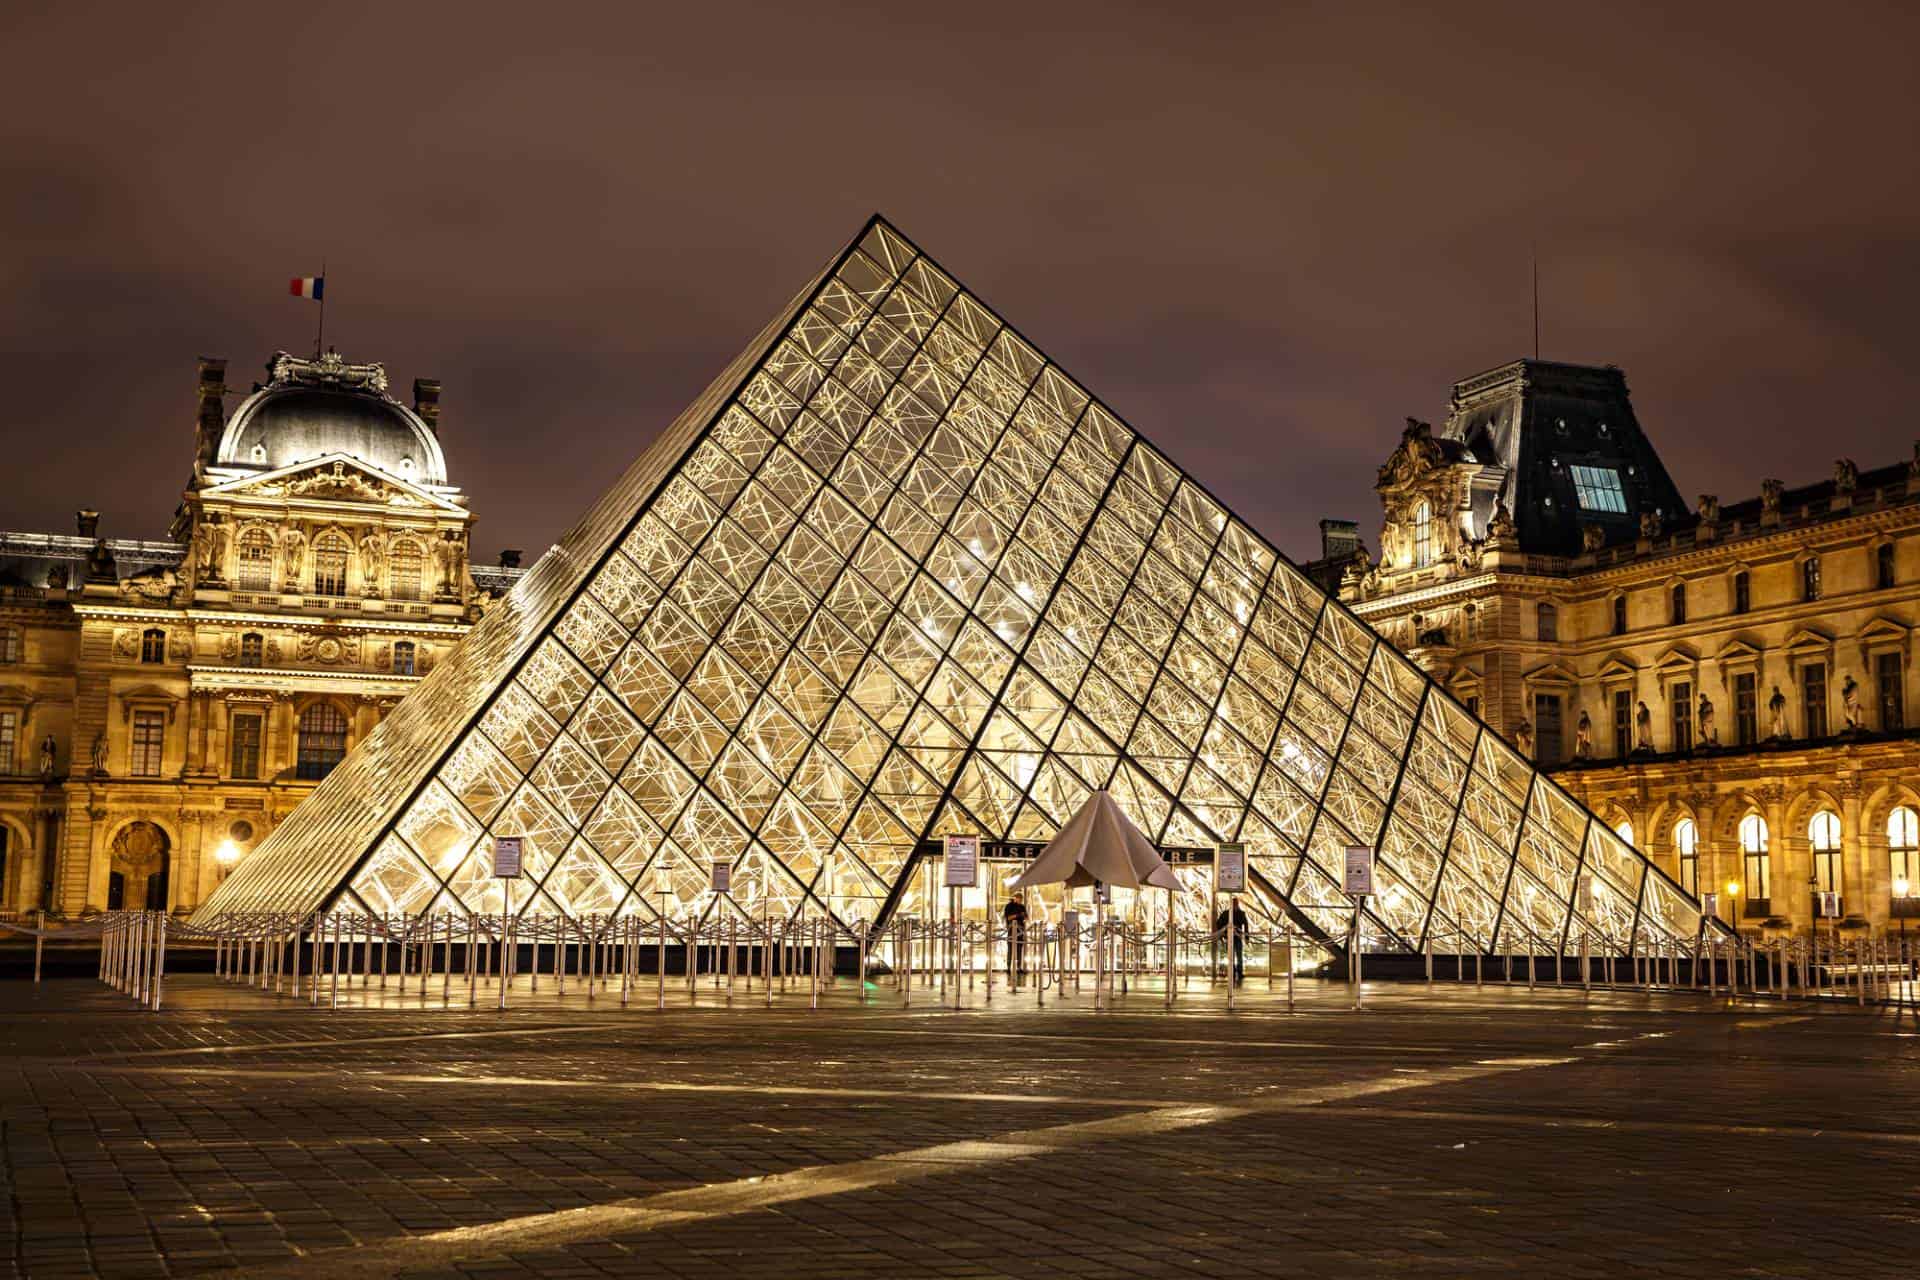 The Louvre Museum, Paris, France at night